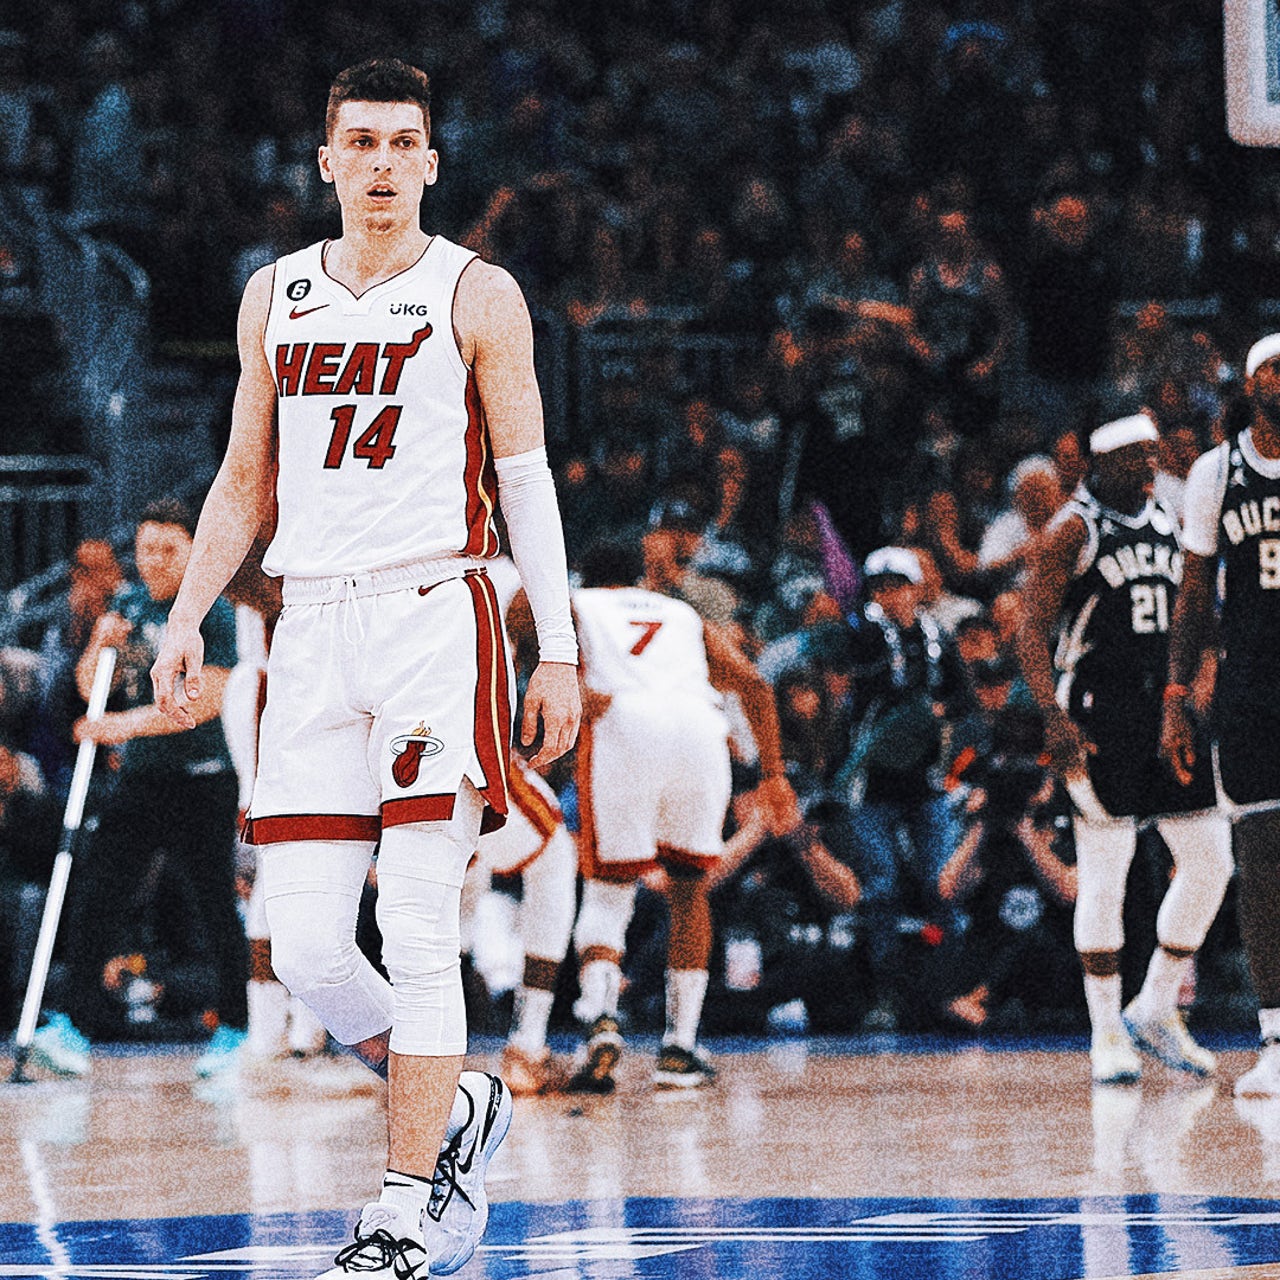 Tyler Herro, other Wisconsin players and former Bucks in NBA